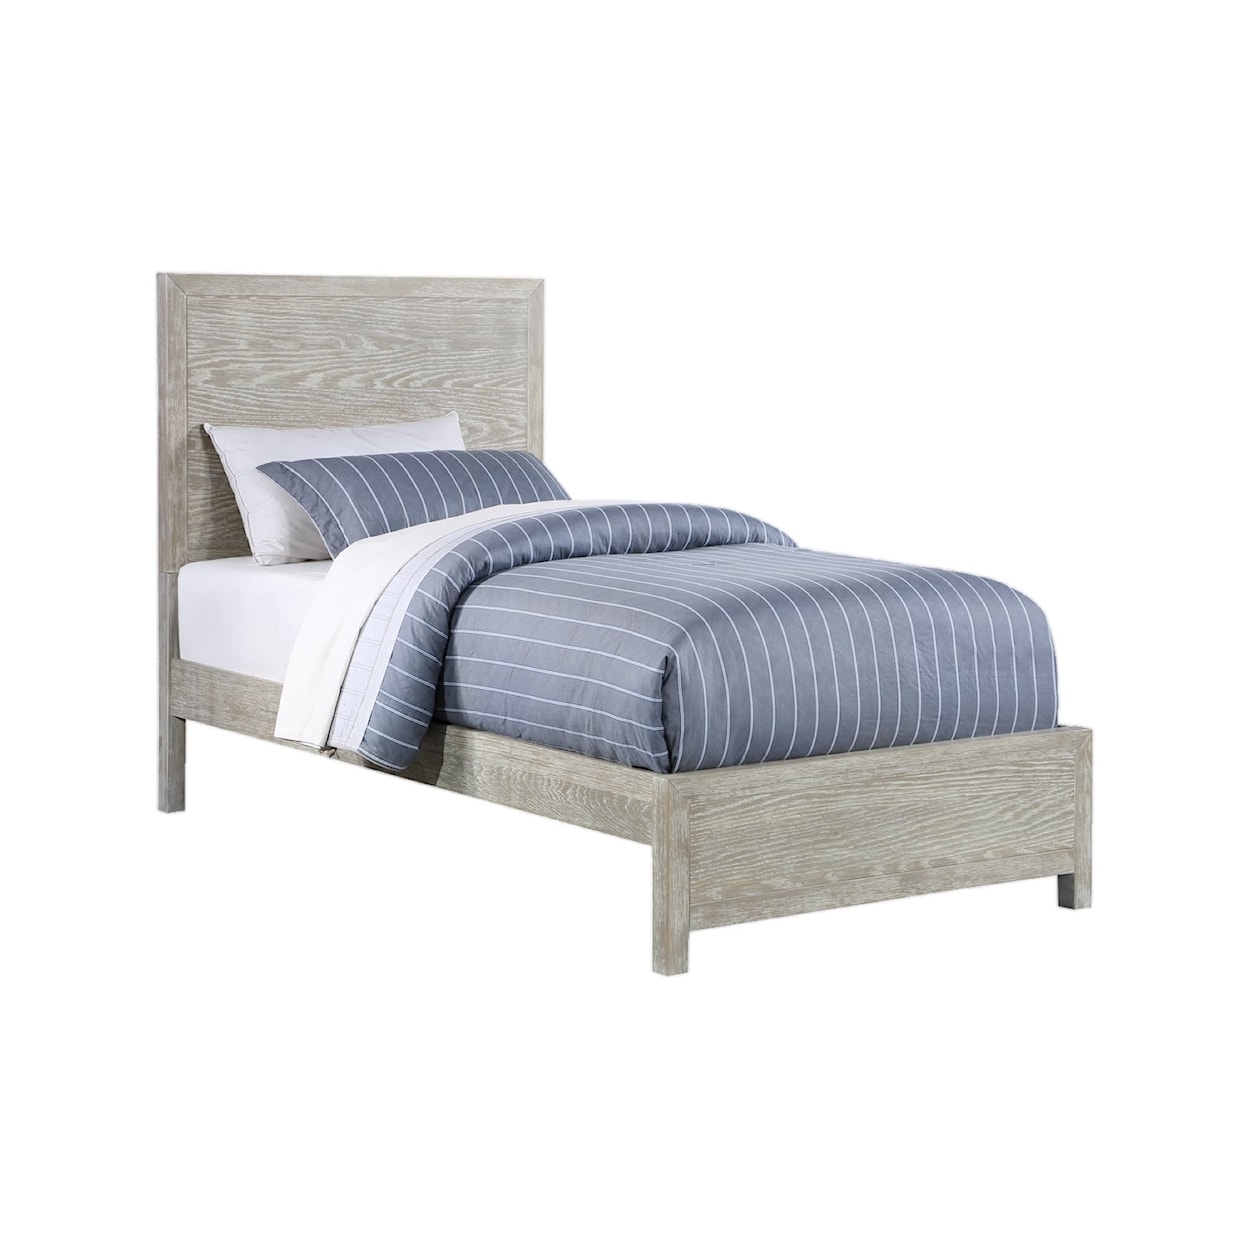 Winners Only Fresno Panel Twin Bed